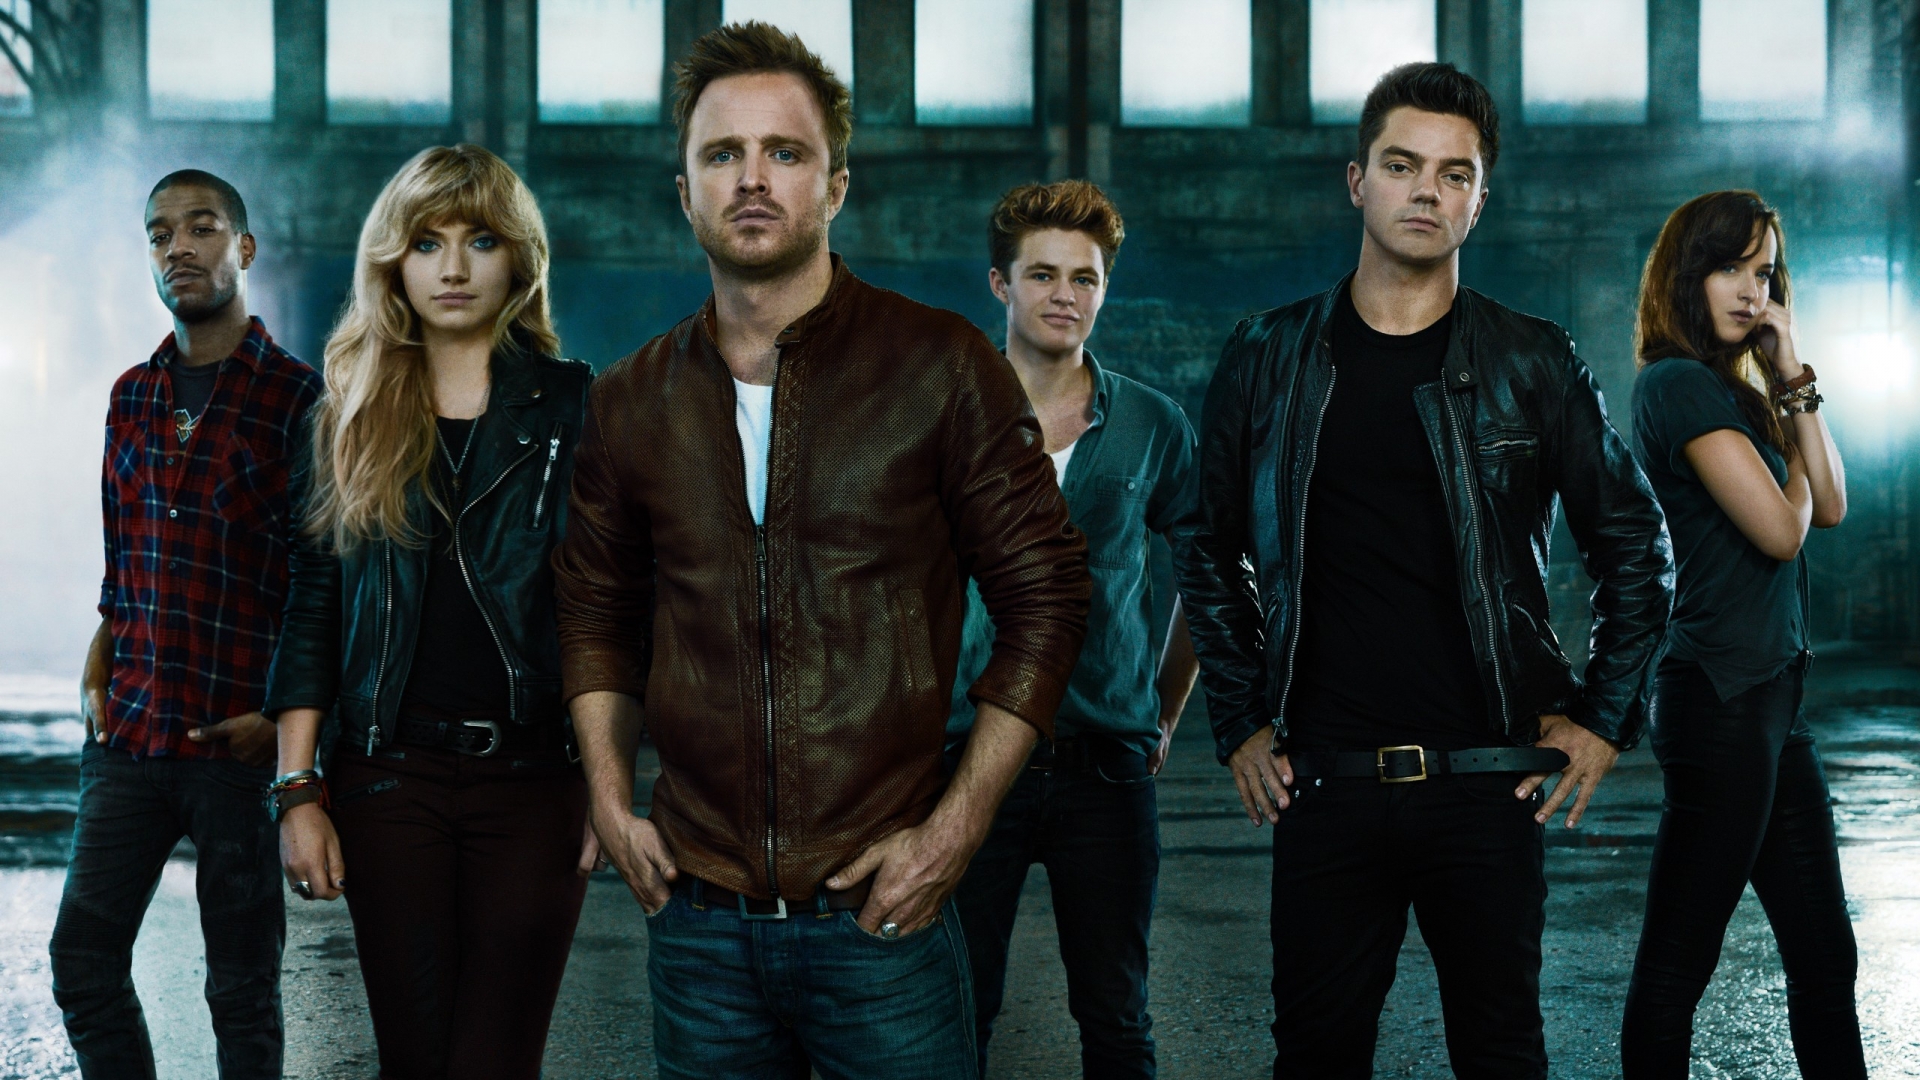 Need for Speed Actors for 1920 x 1080 HDTV 1080p resolution